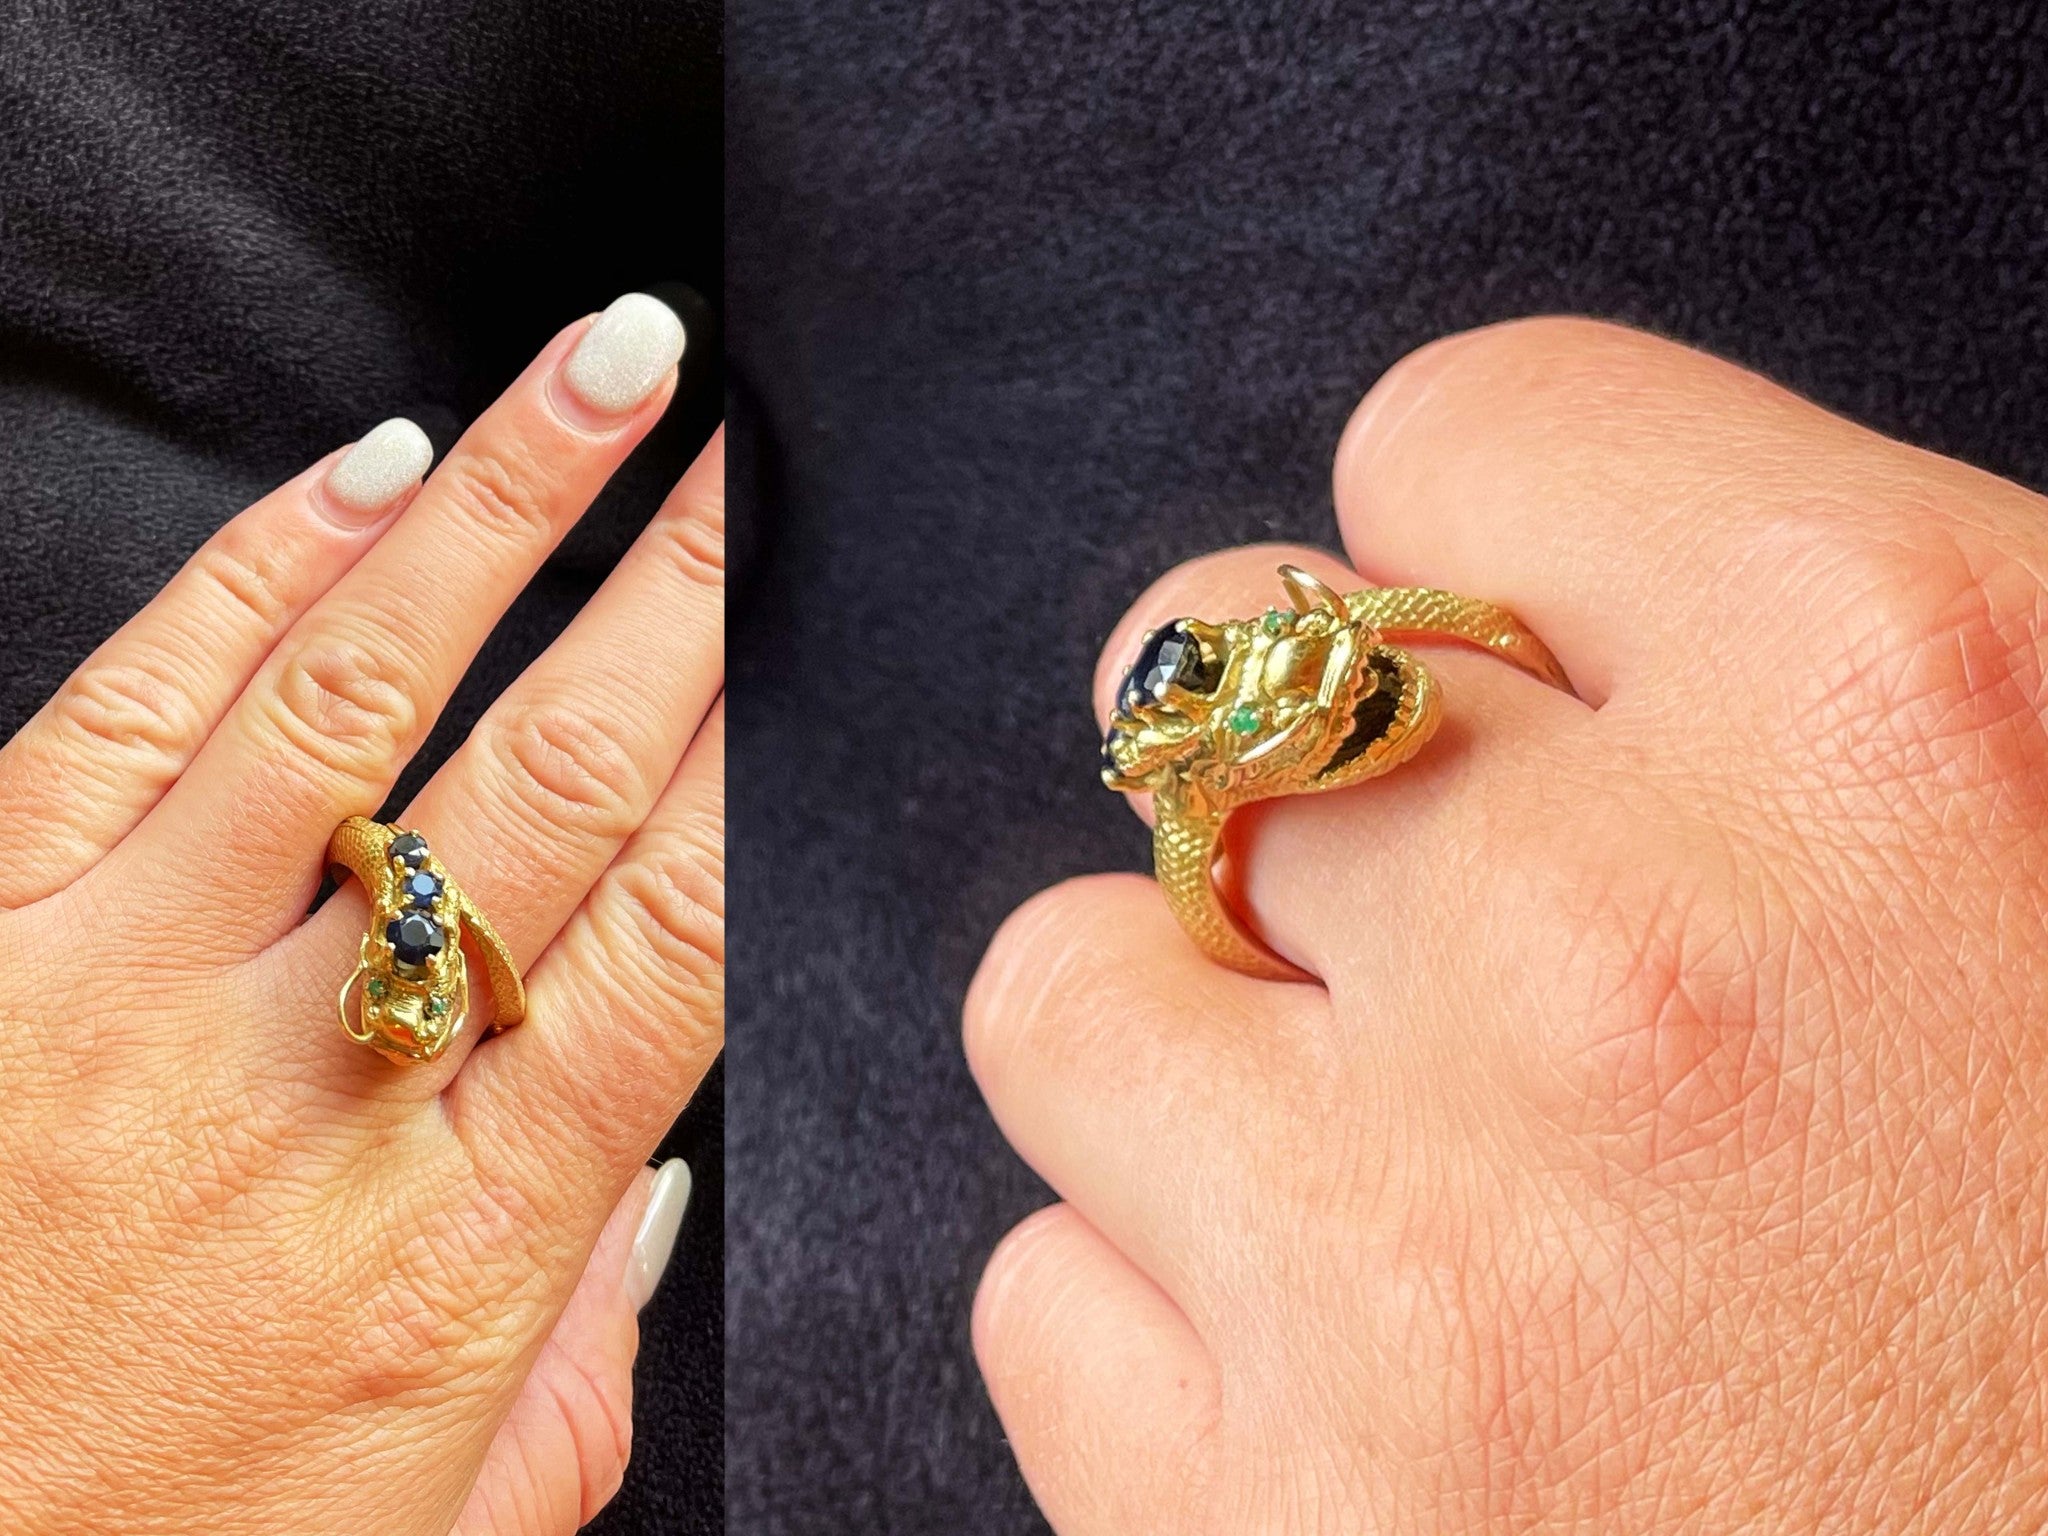 Chinese Dragon Wraparound Ring with Sapphires & Emerald Eyes in 14k Yellow Gold